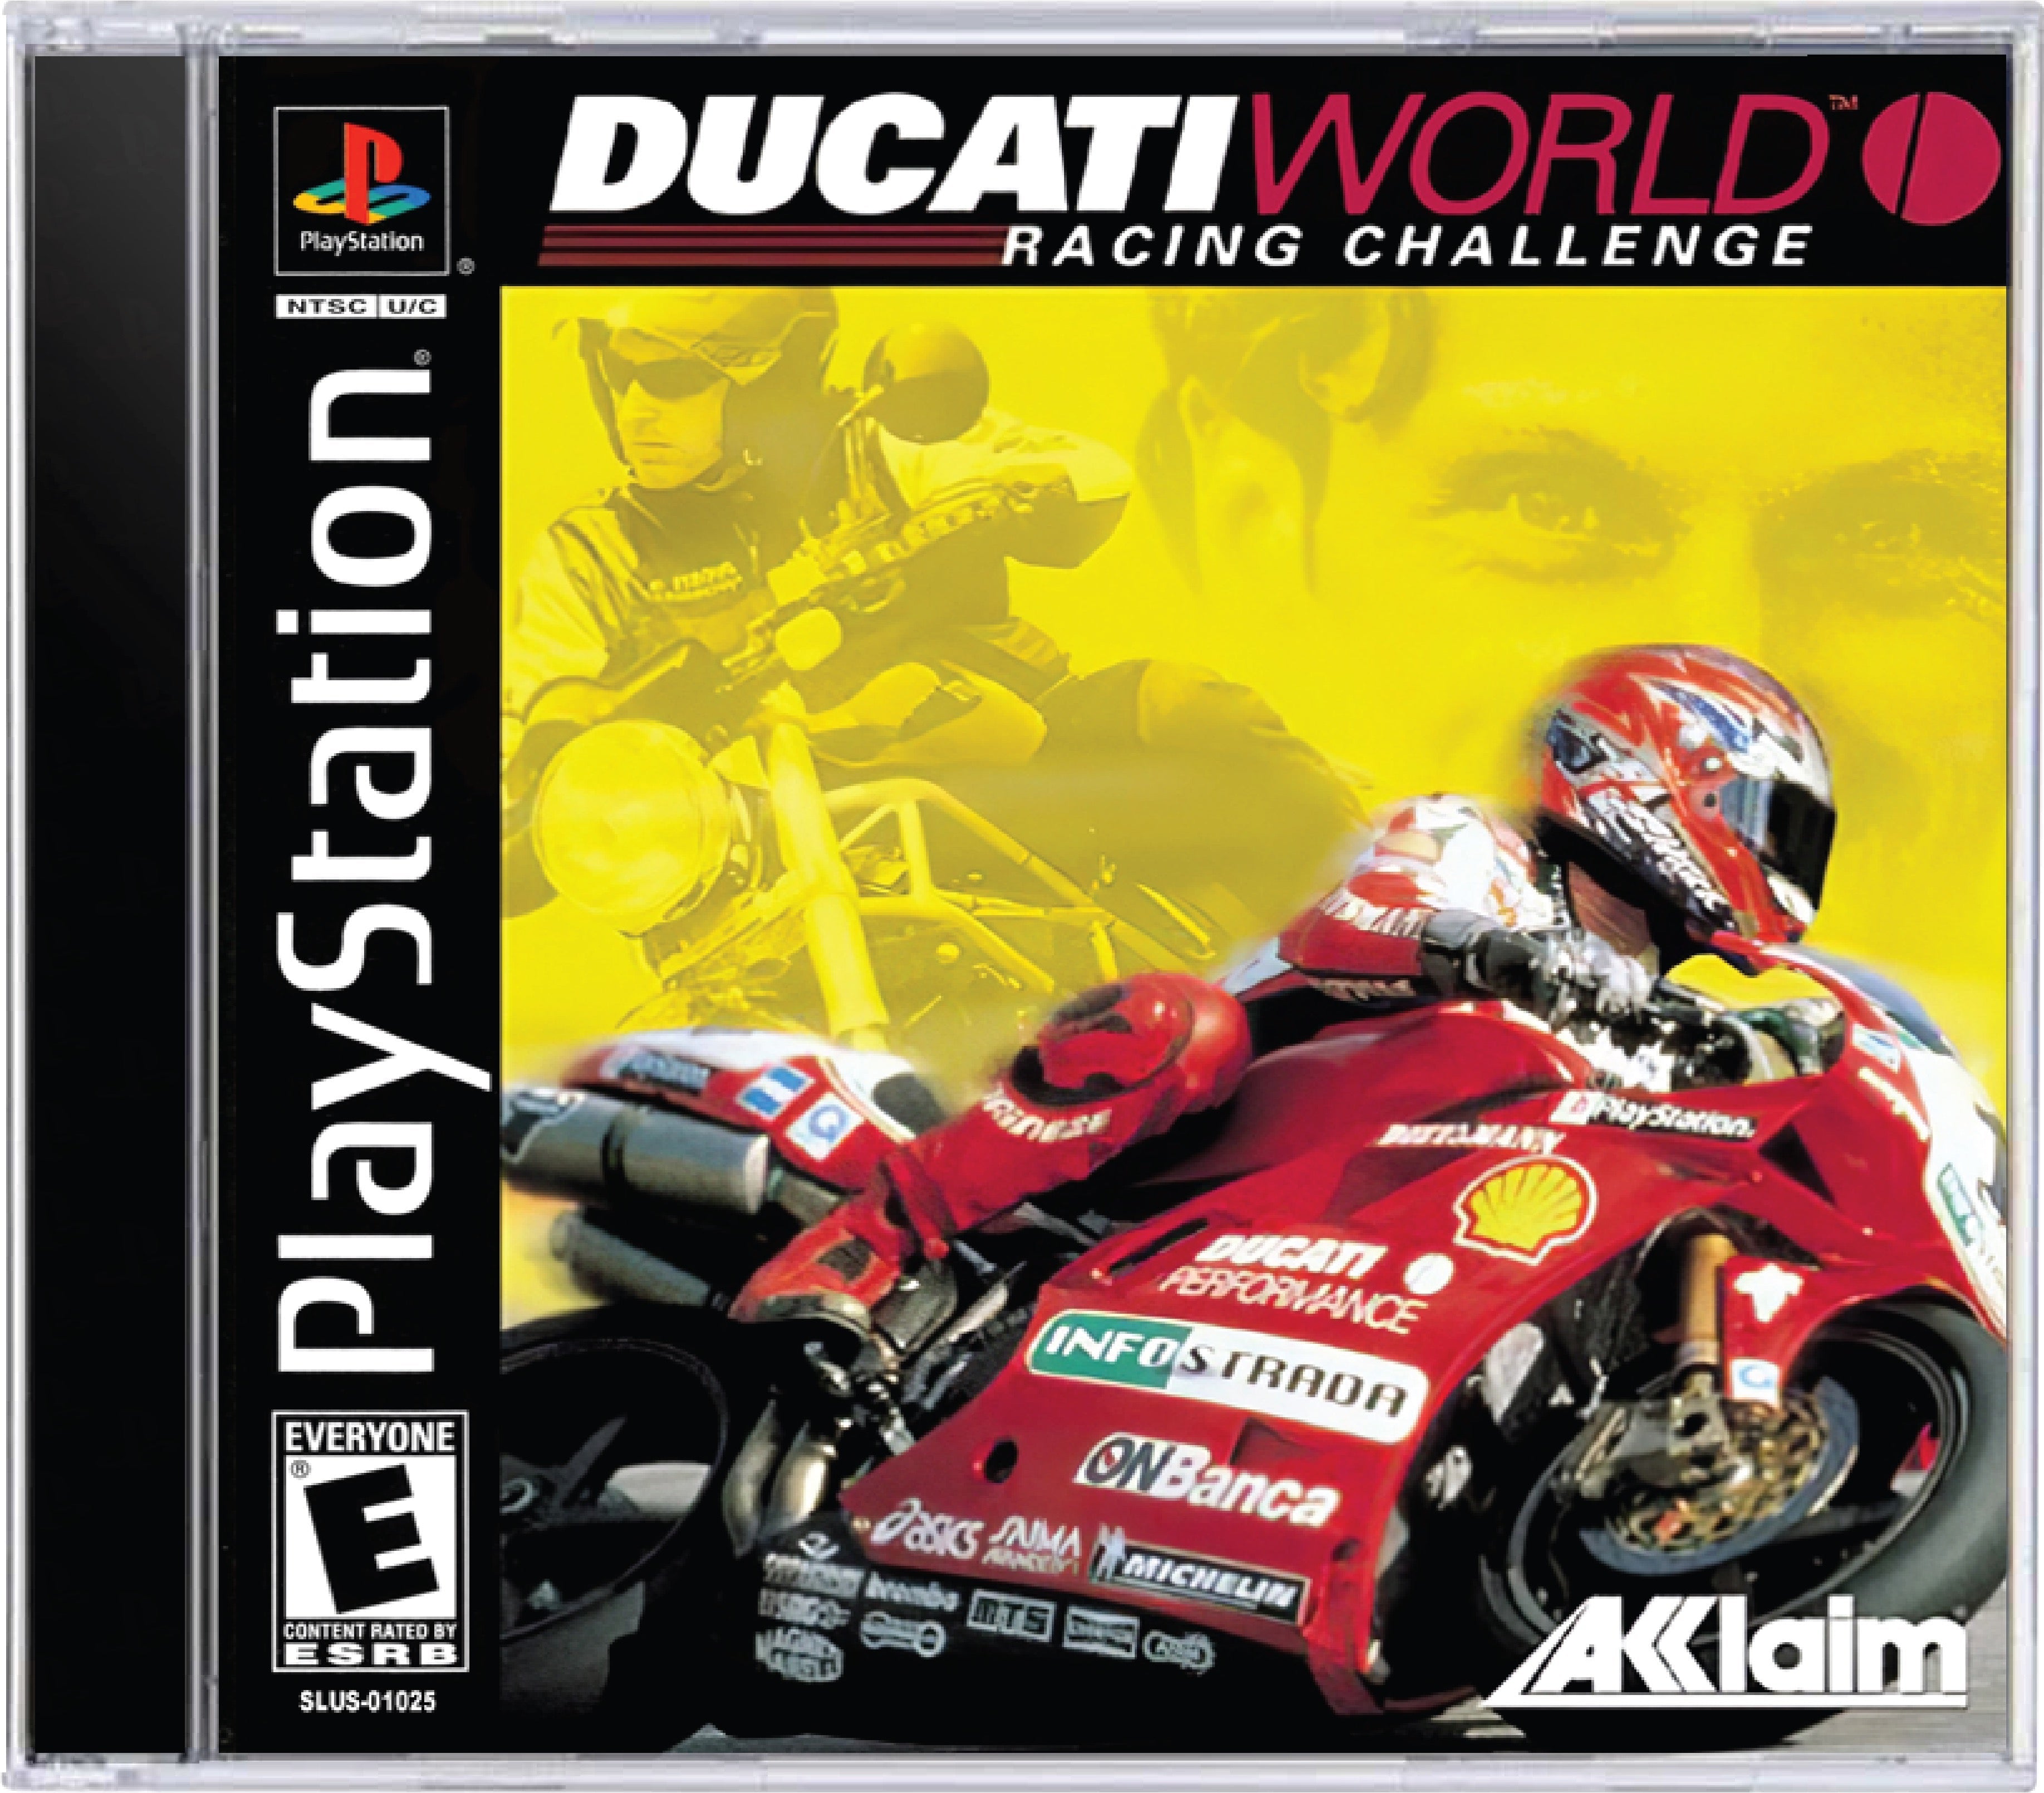 Ducati World Racing Challenge Cover Art and Product Photo